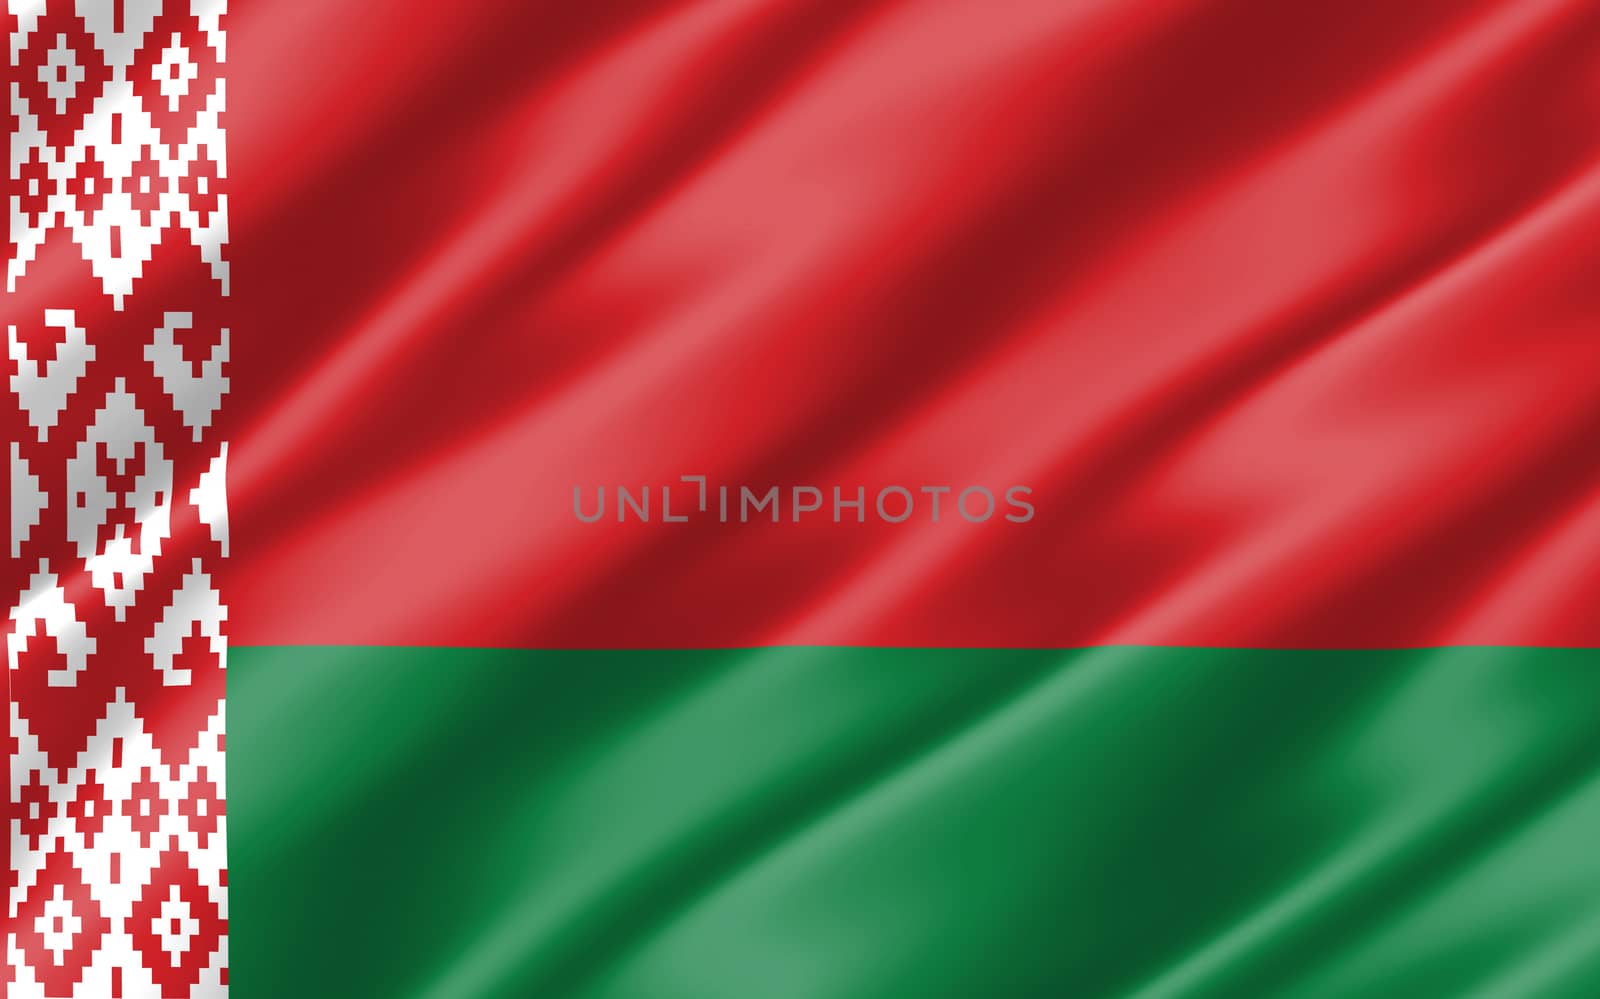 Silk wavy flag of Belarus graphic. Wavy Belarusian flag illustration. Rippled Belarus country flag is a symbol of freedom, patriotism and independence. by Skylark